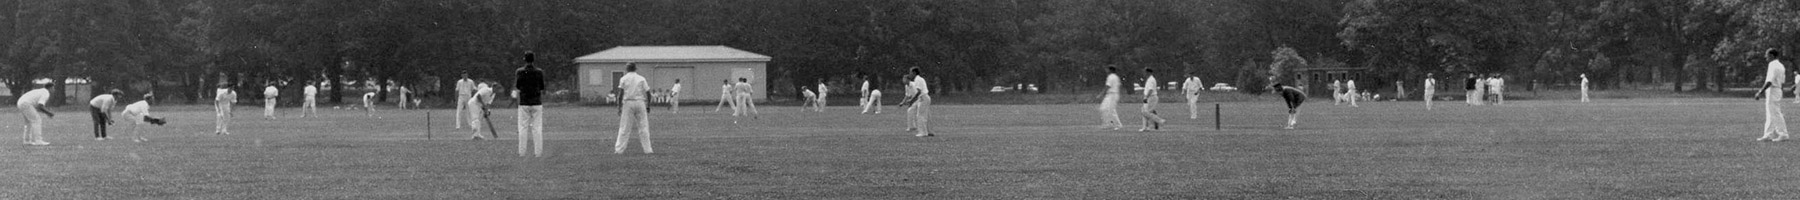 a cricket game on a big treelined field